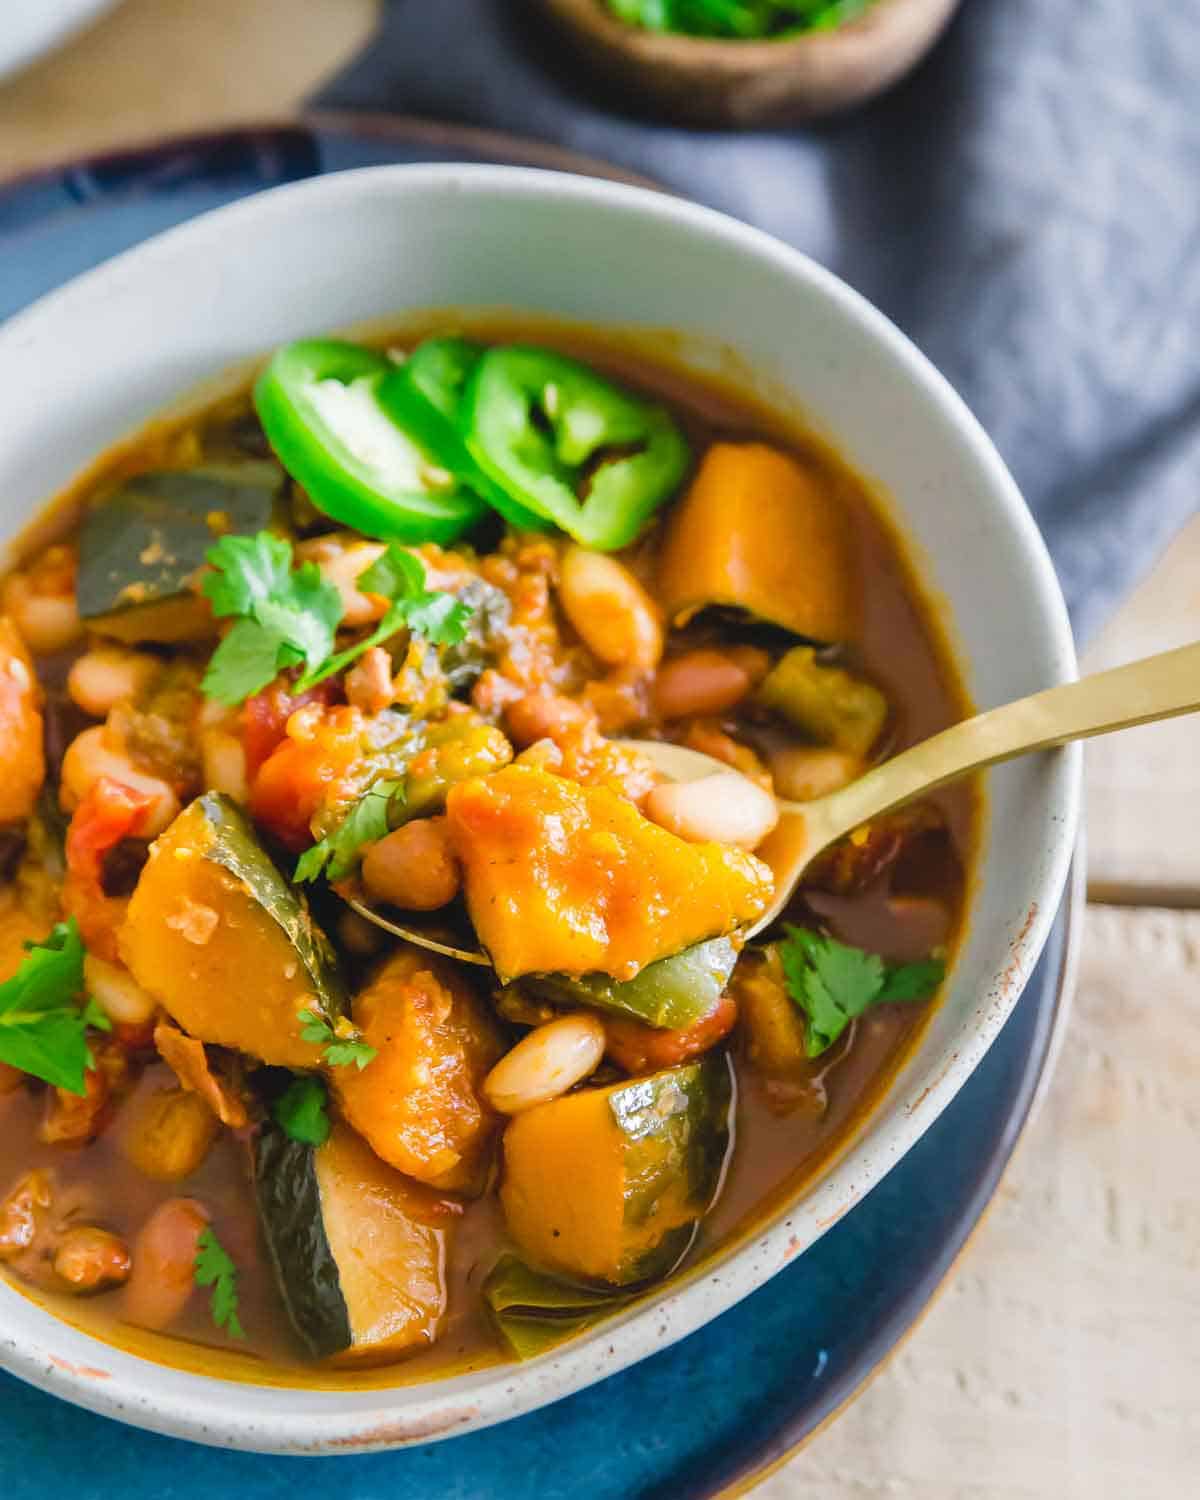 Vegetarian white bean chili with kabocha squash is the perfect warm and filling winter meal.